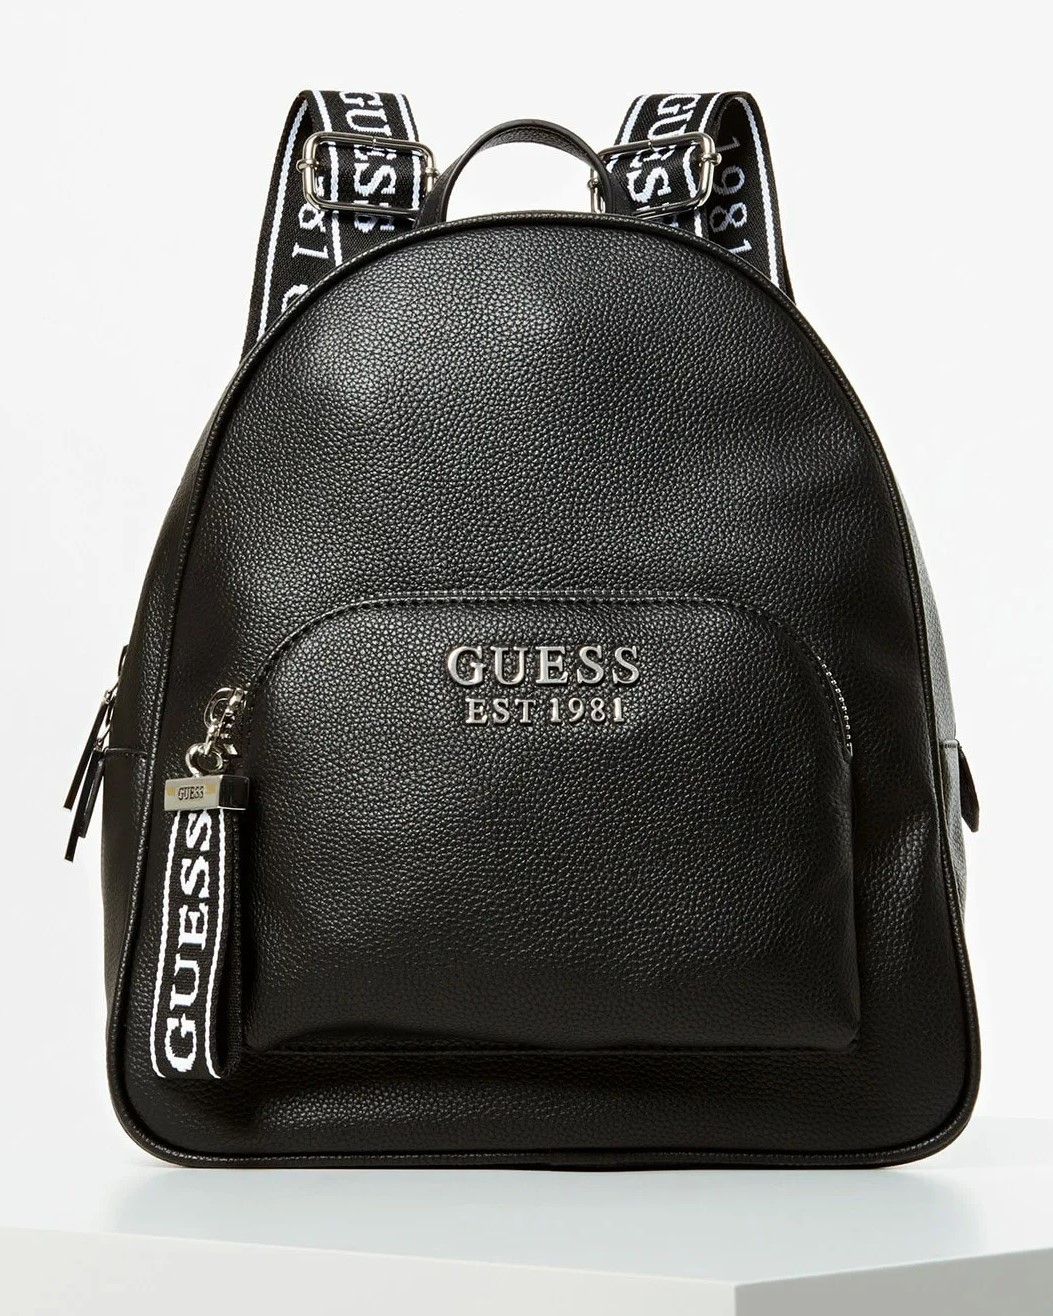 BALO GUESS BACKPACK 5